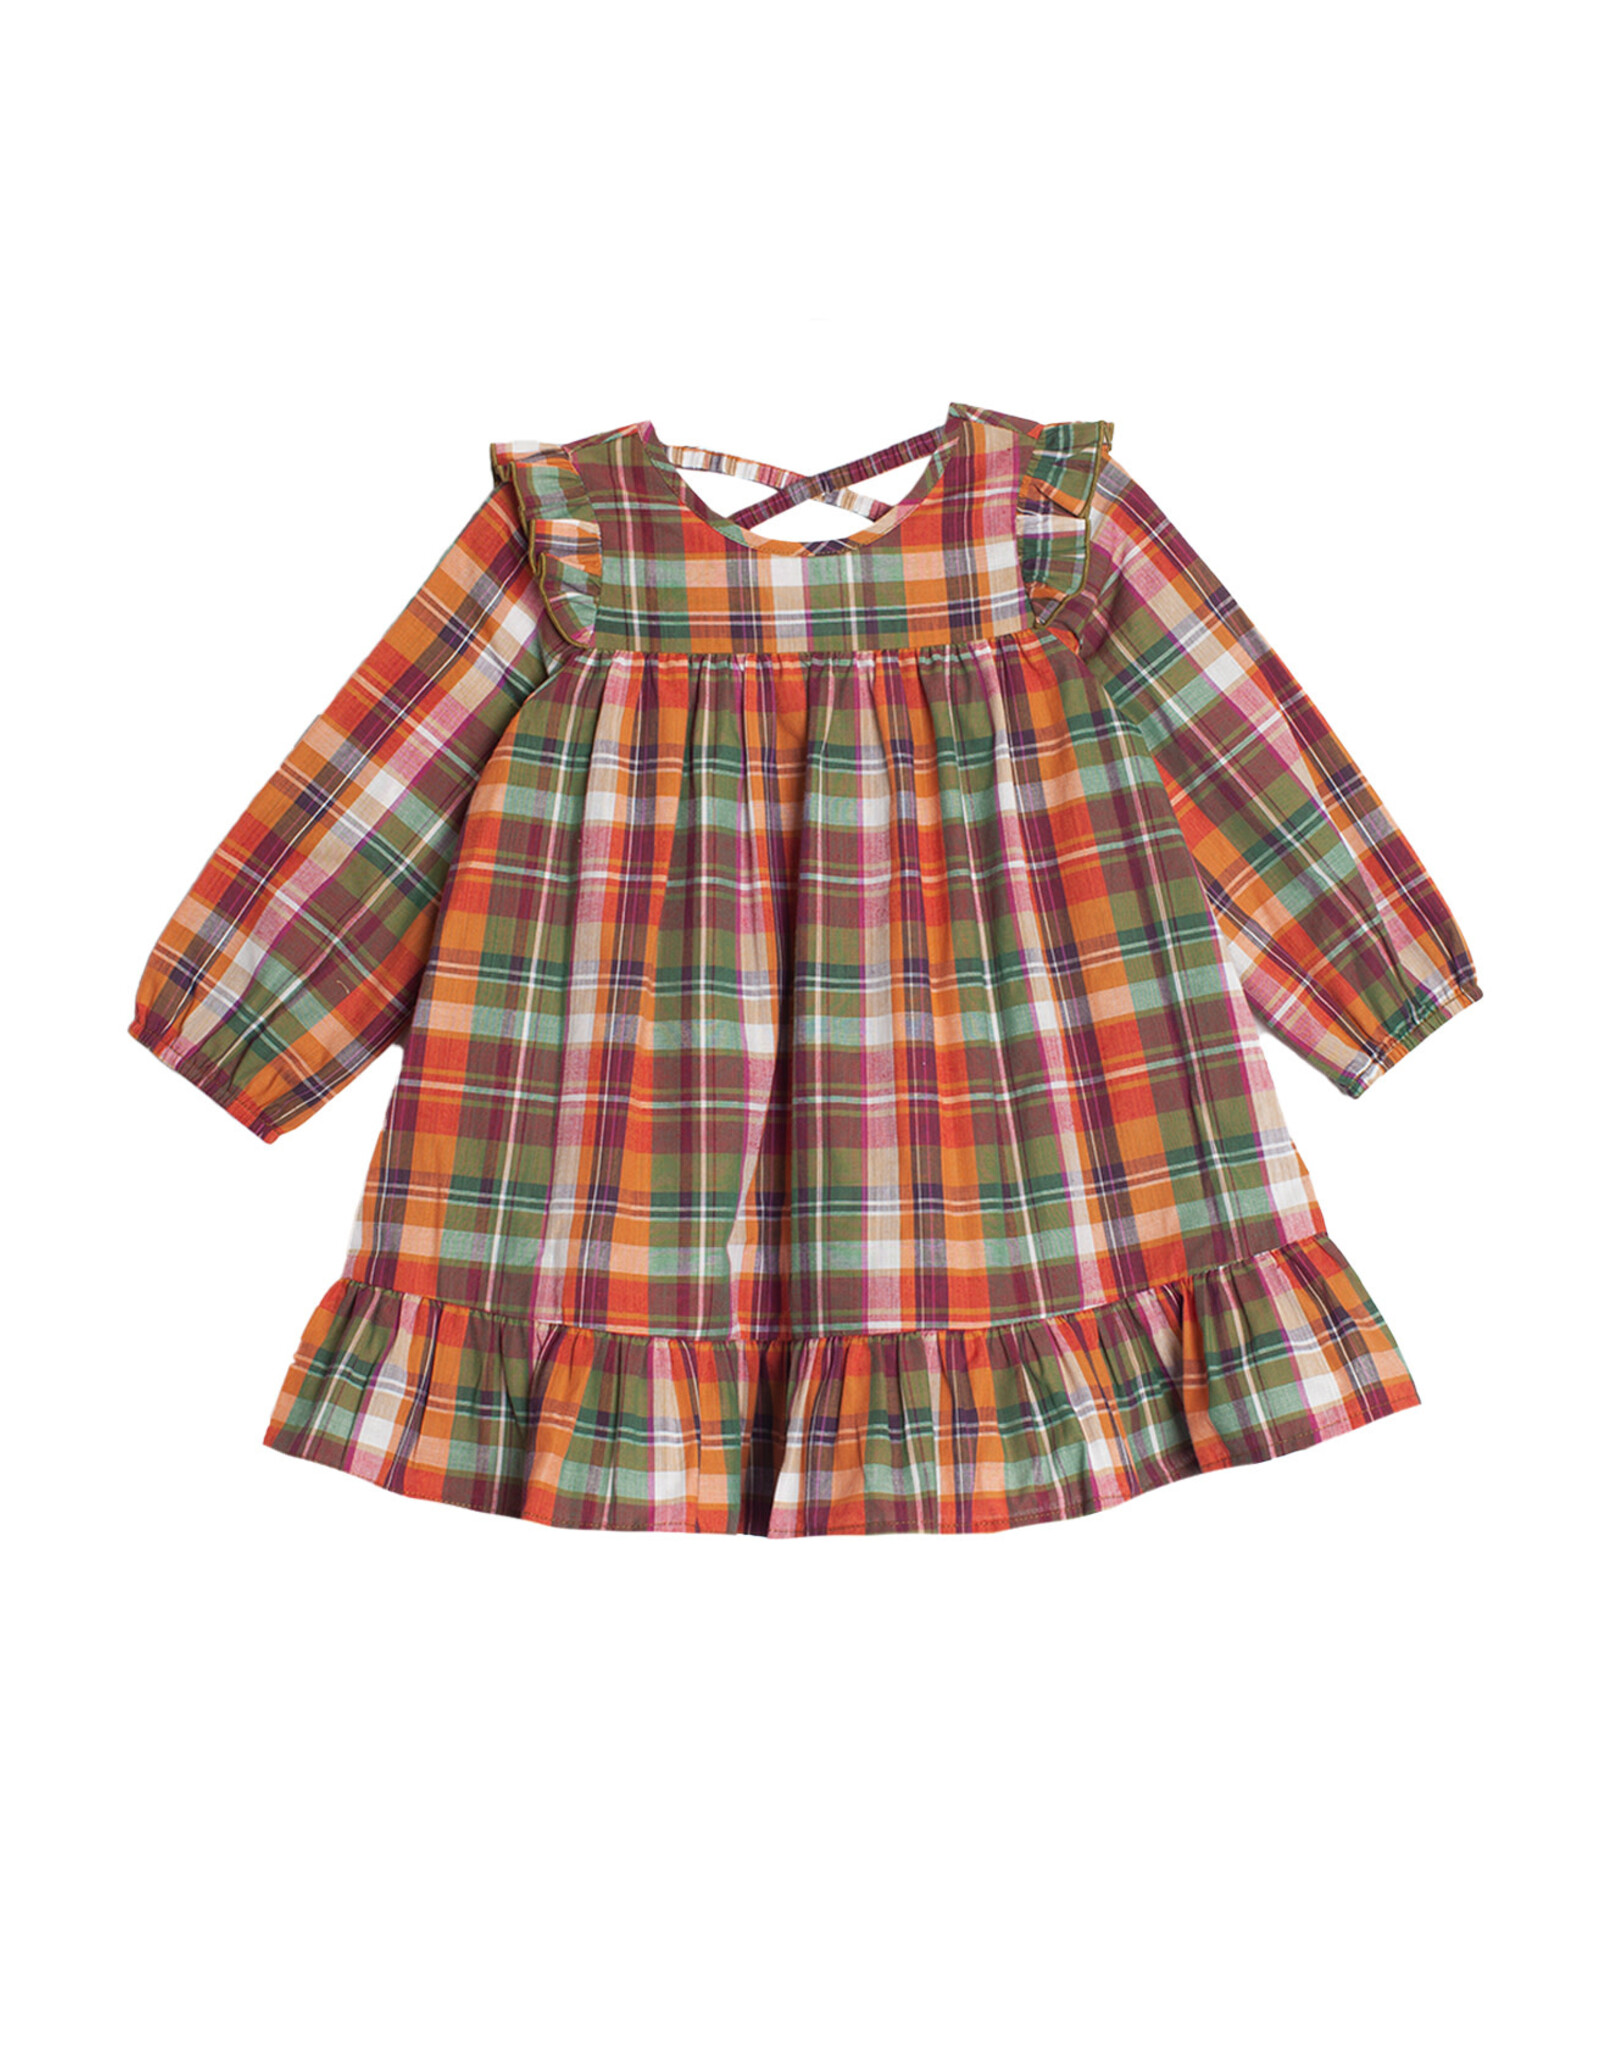 Mabel and Honey Pumpkin Patch Woven Dress-Plaid